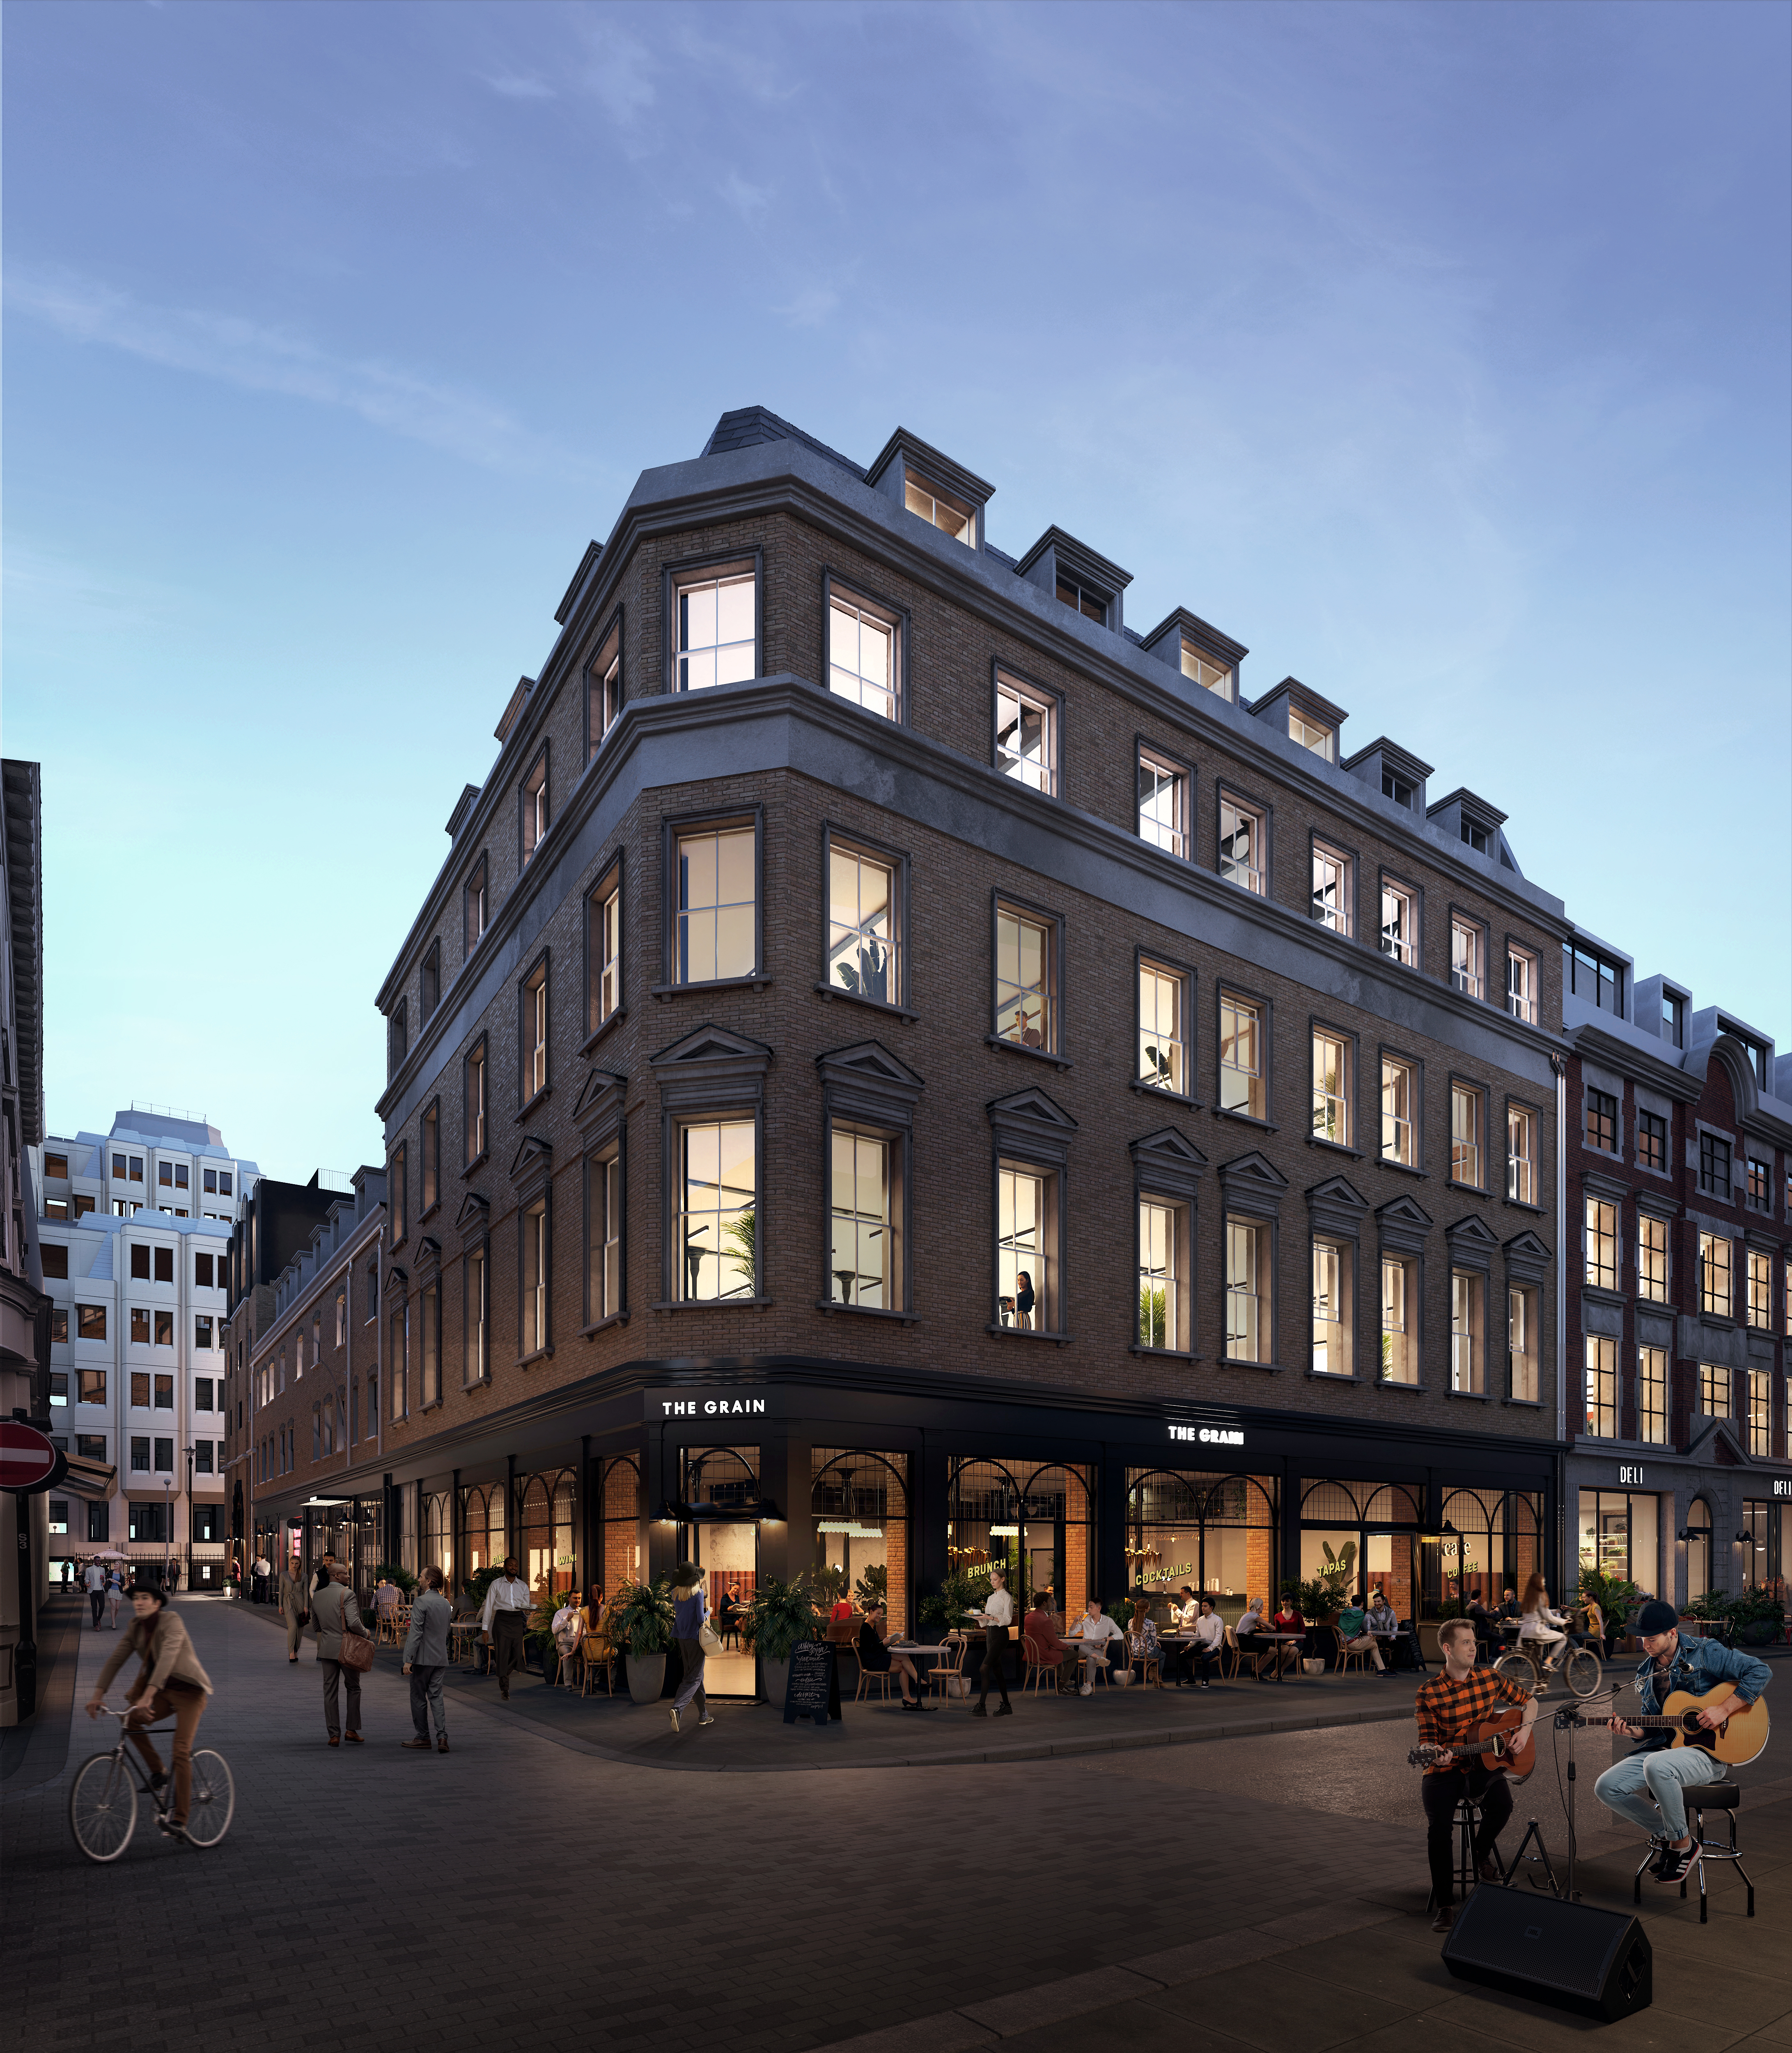 The Grain House in Covent Garden is targeting BREEAM Excellent